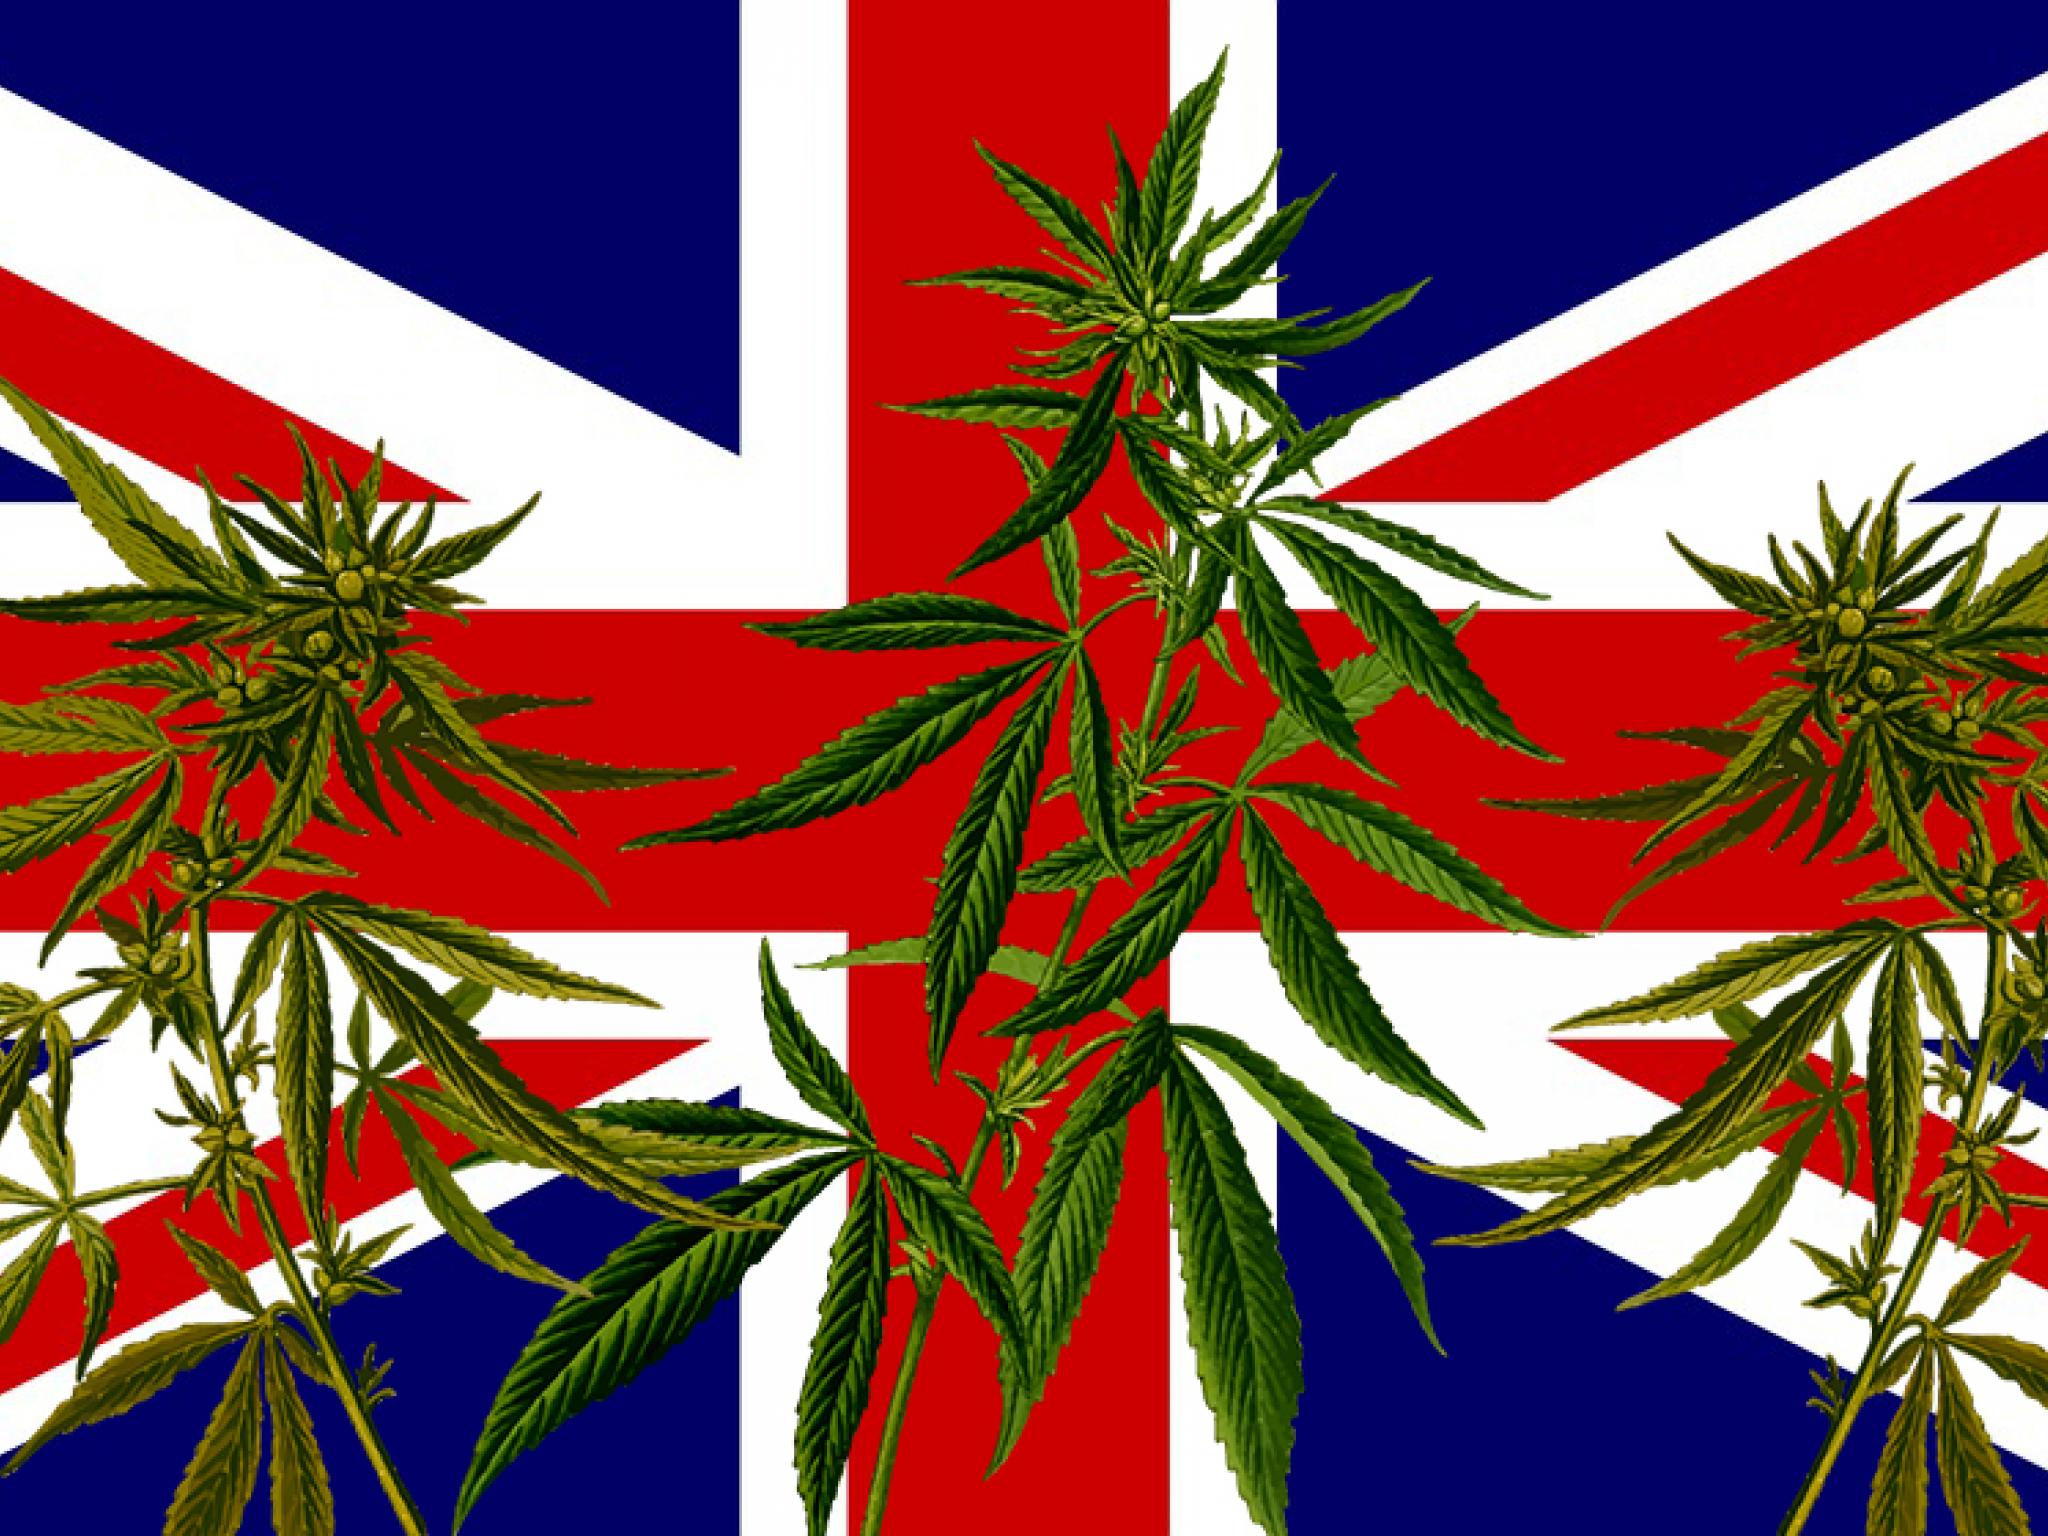  study-uk-cannabis-industry-could-be-worth-28b-per-year-if-these-problems-are-fixed 